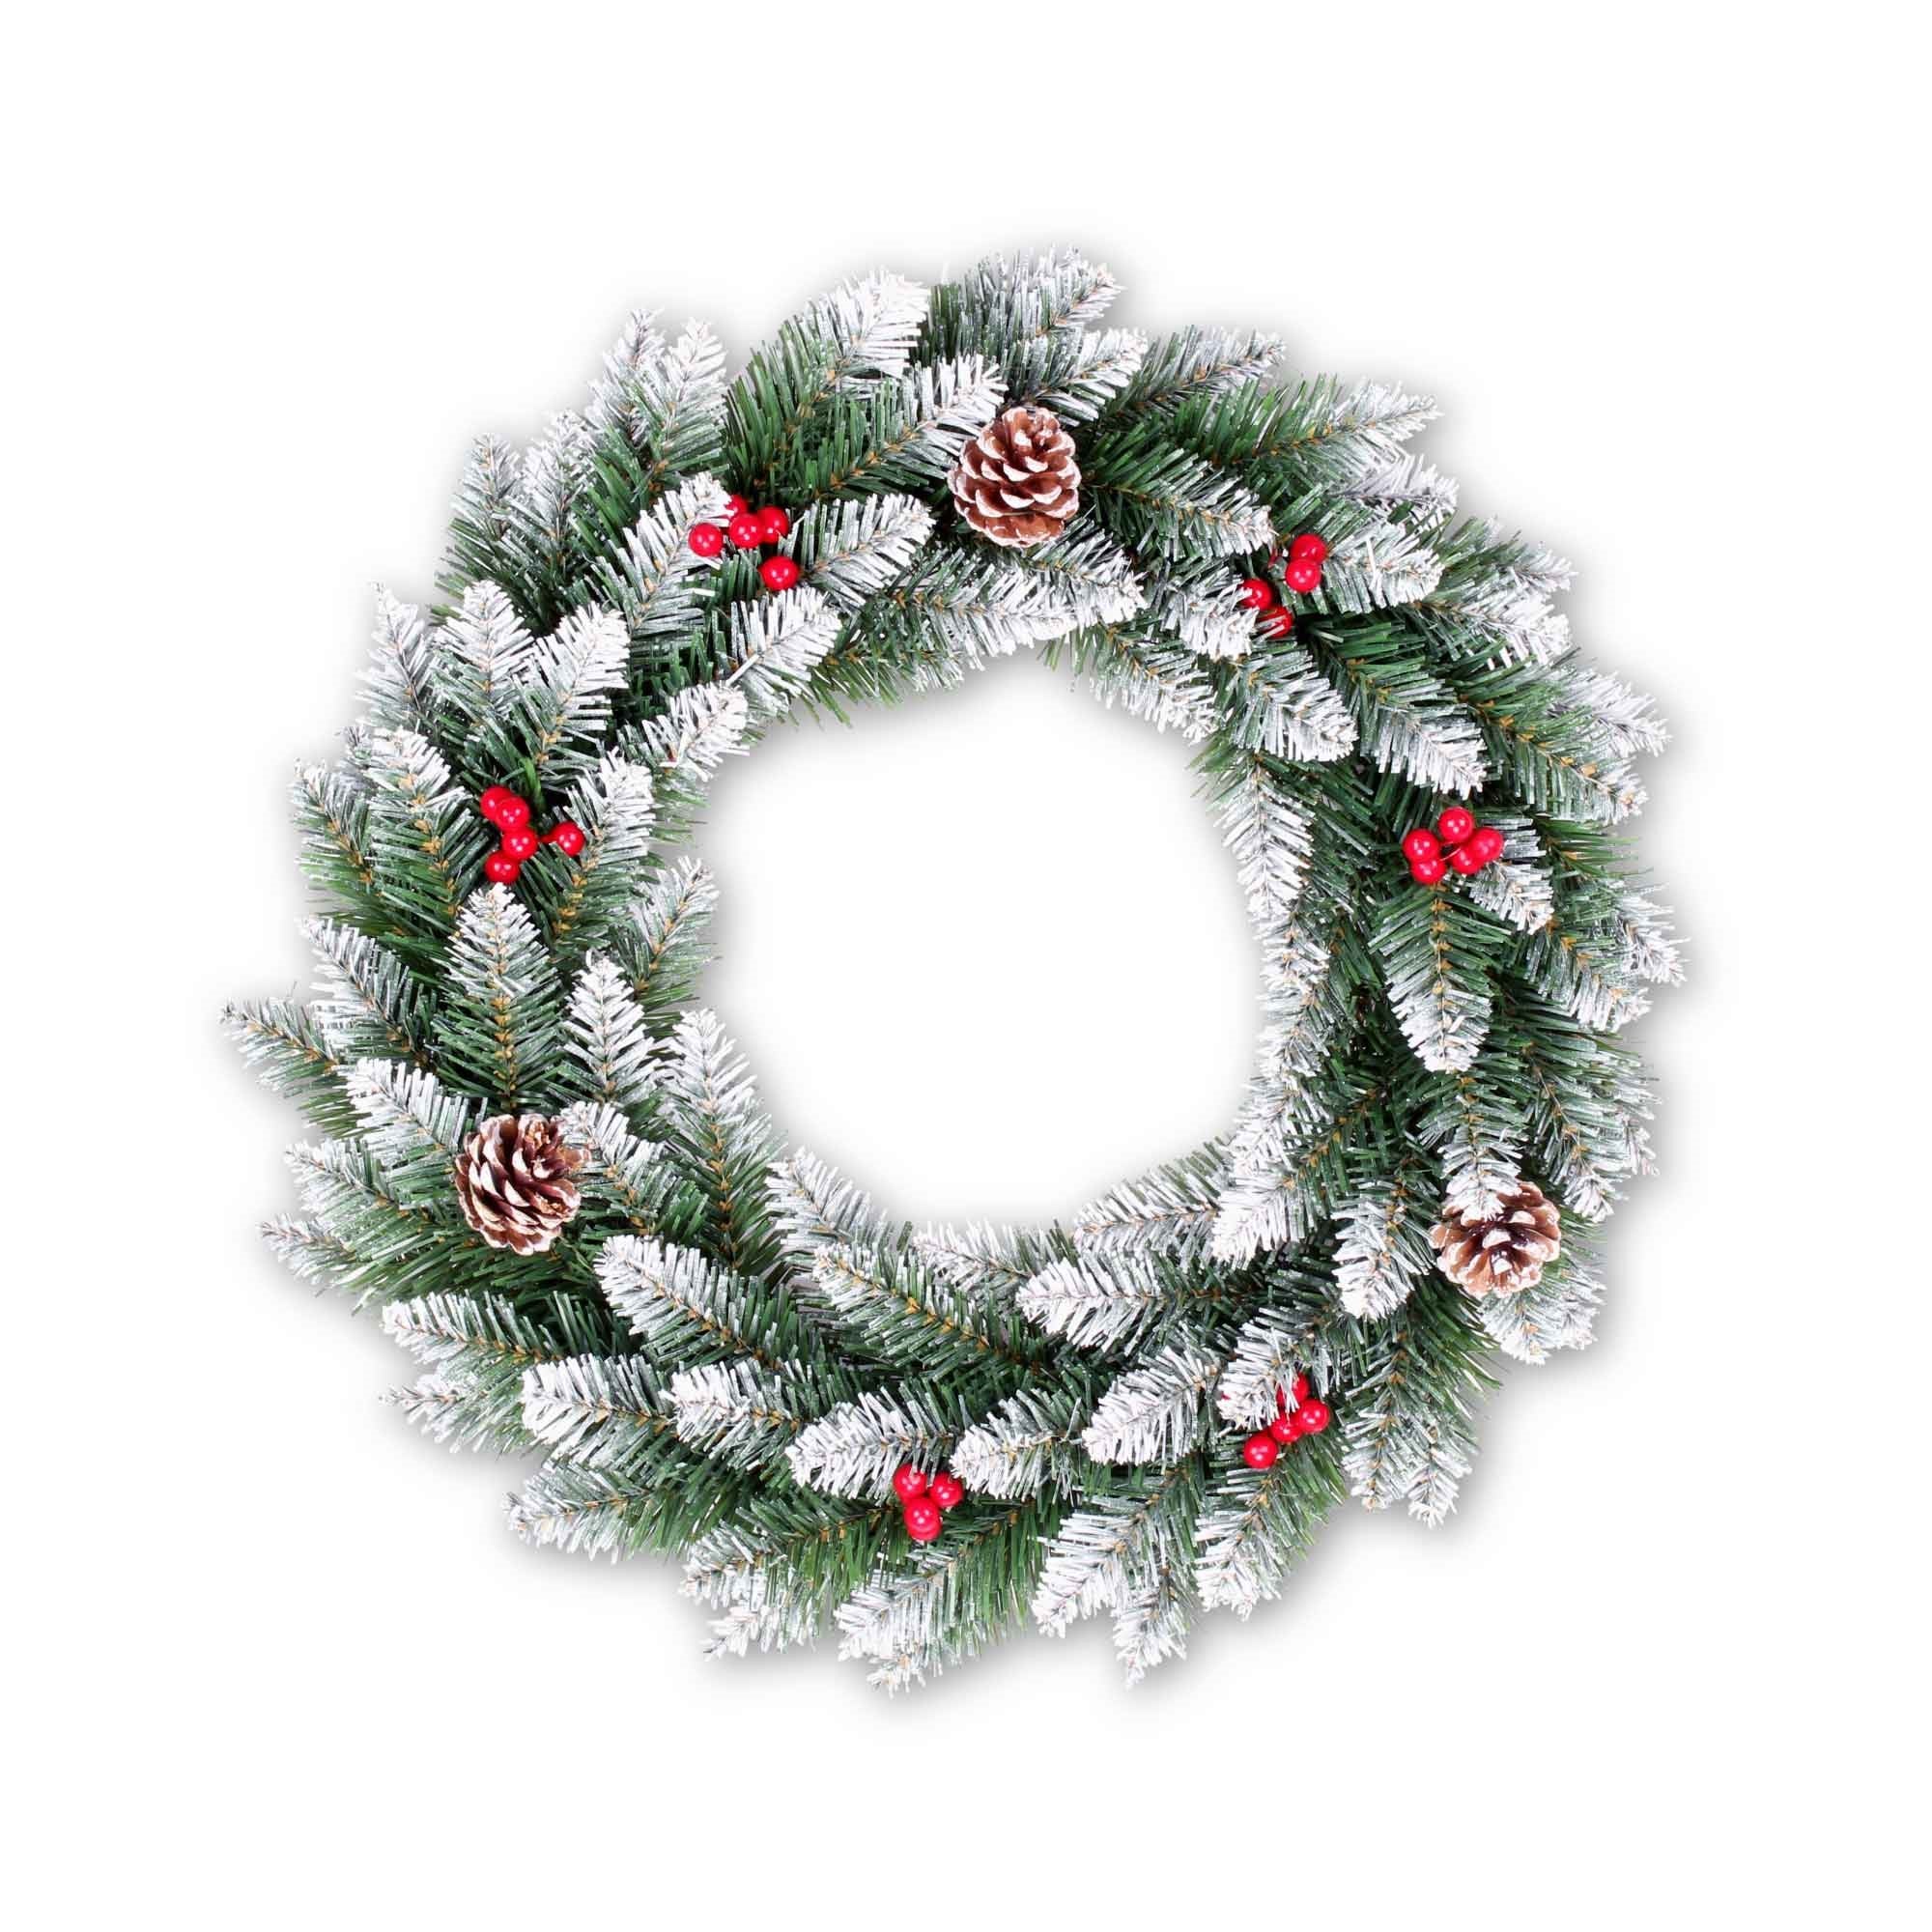 Christmas Sparkle Luxury Nevada Christmas Wreath with Pinecones and Berries 50cm - Green  | TJ Hughes